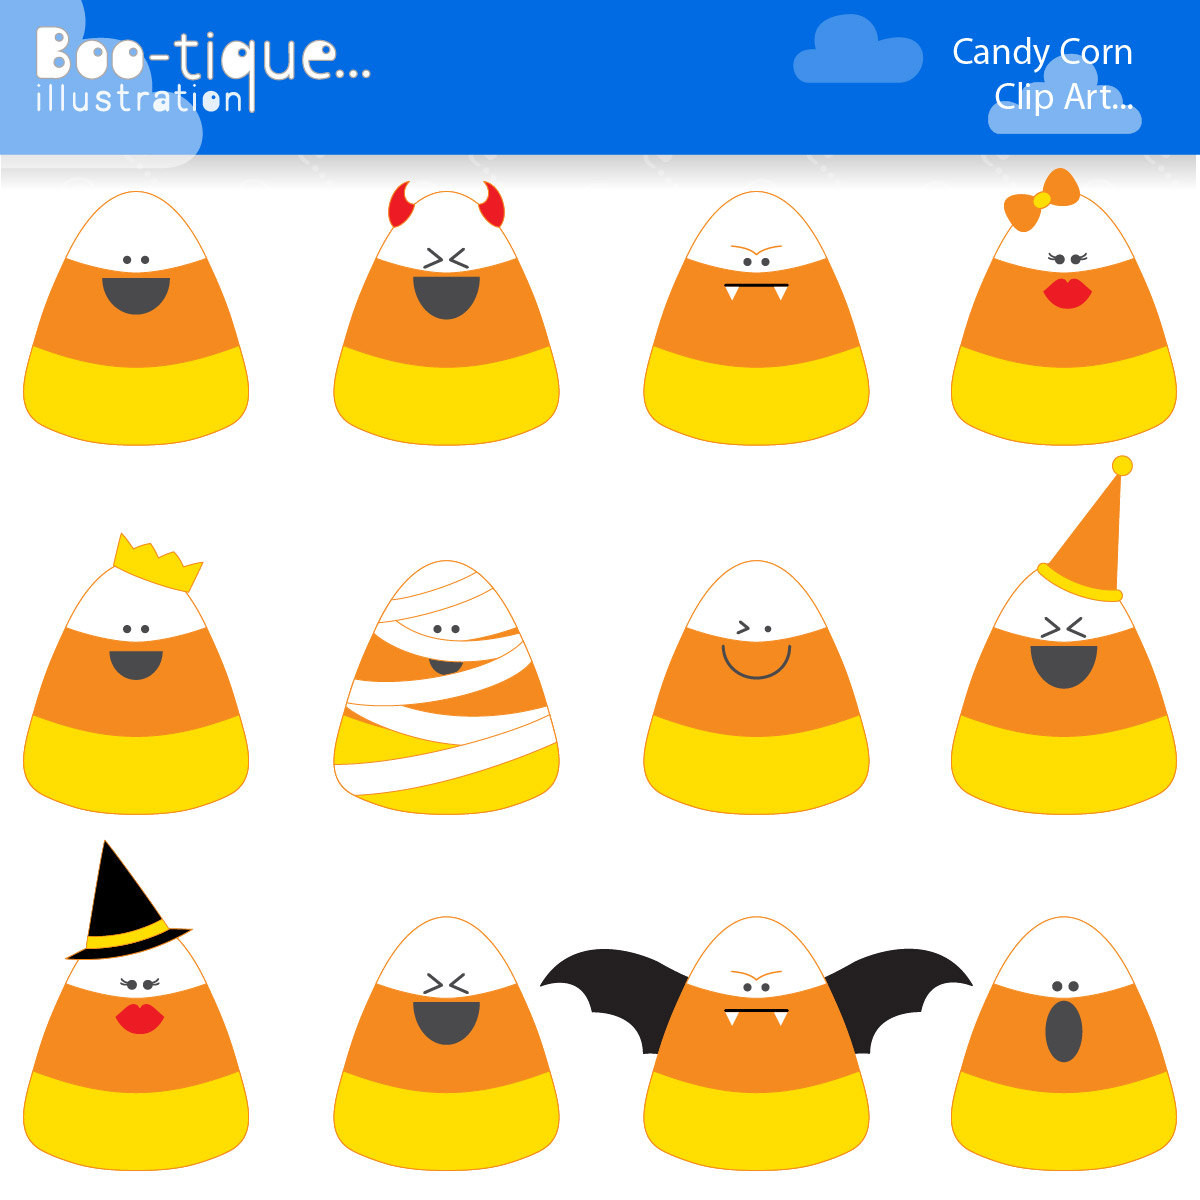 Candy Corn Clipart
 Halloween Candy Corn Digtial Clipart by BootiqueIllustration